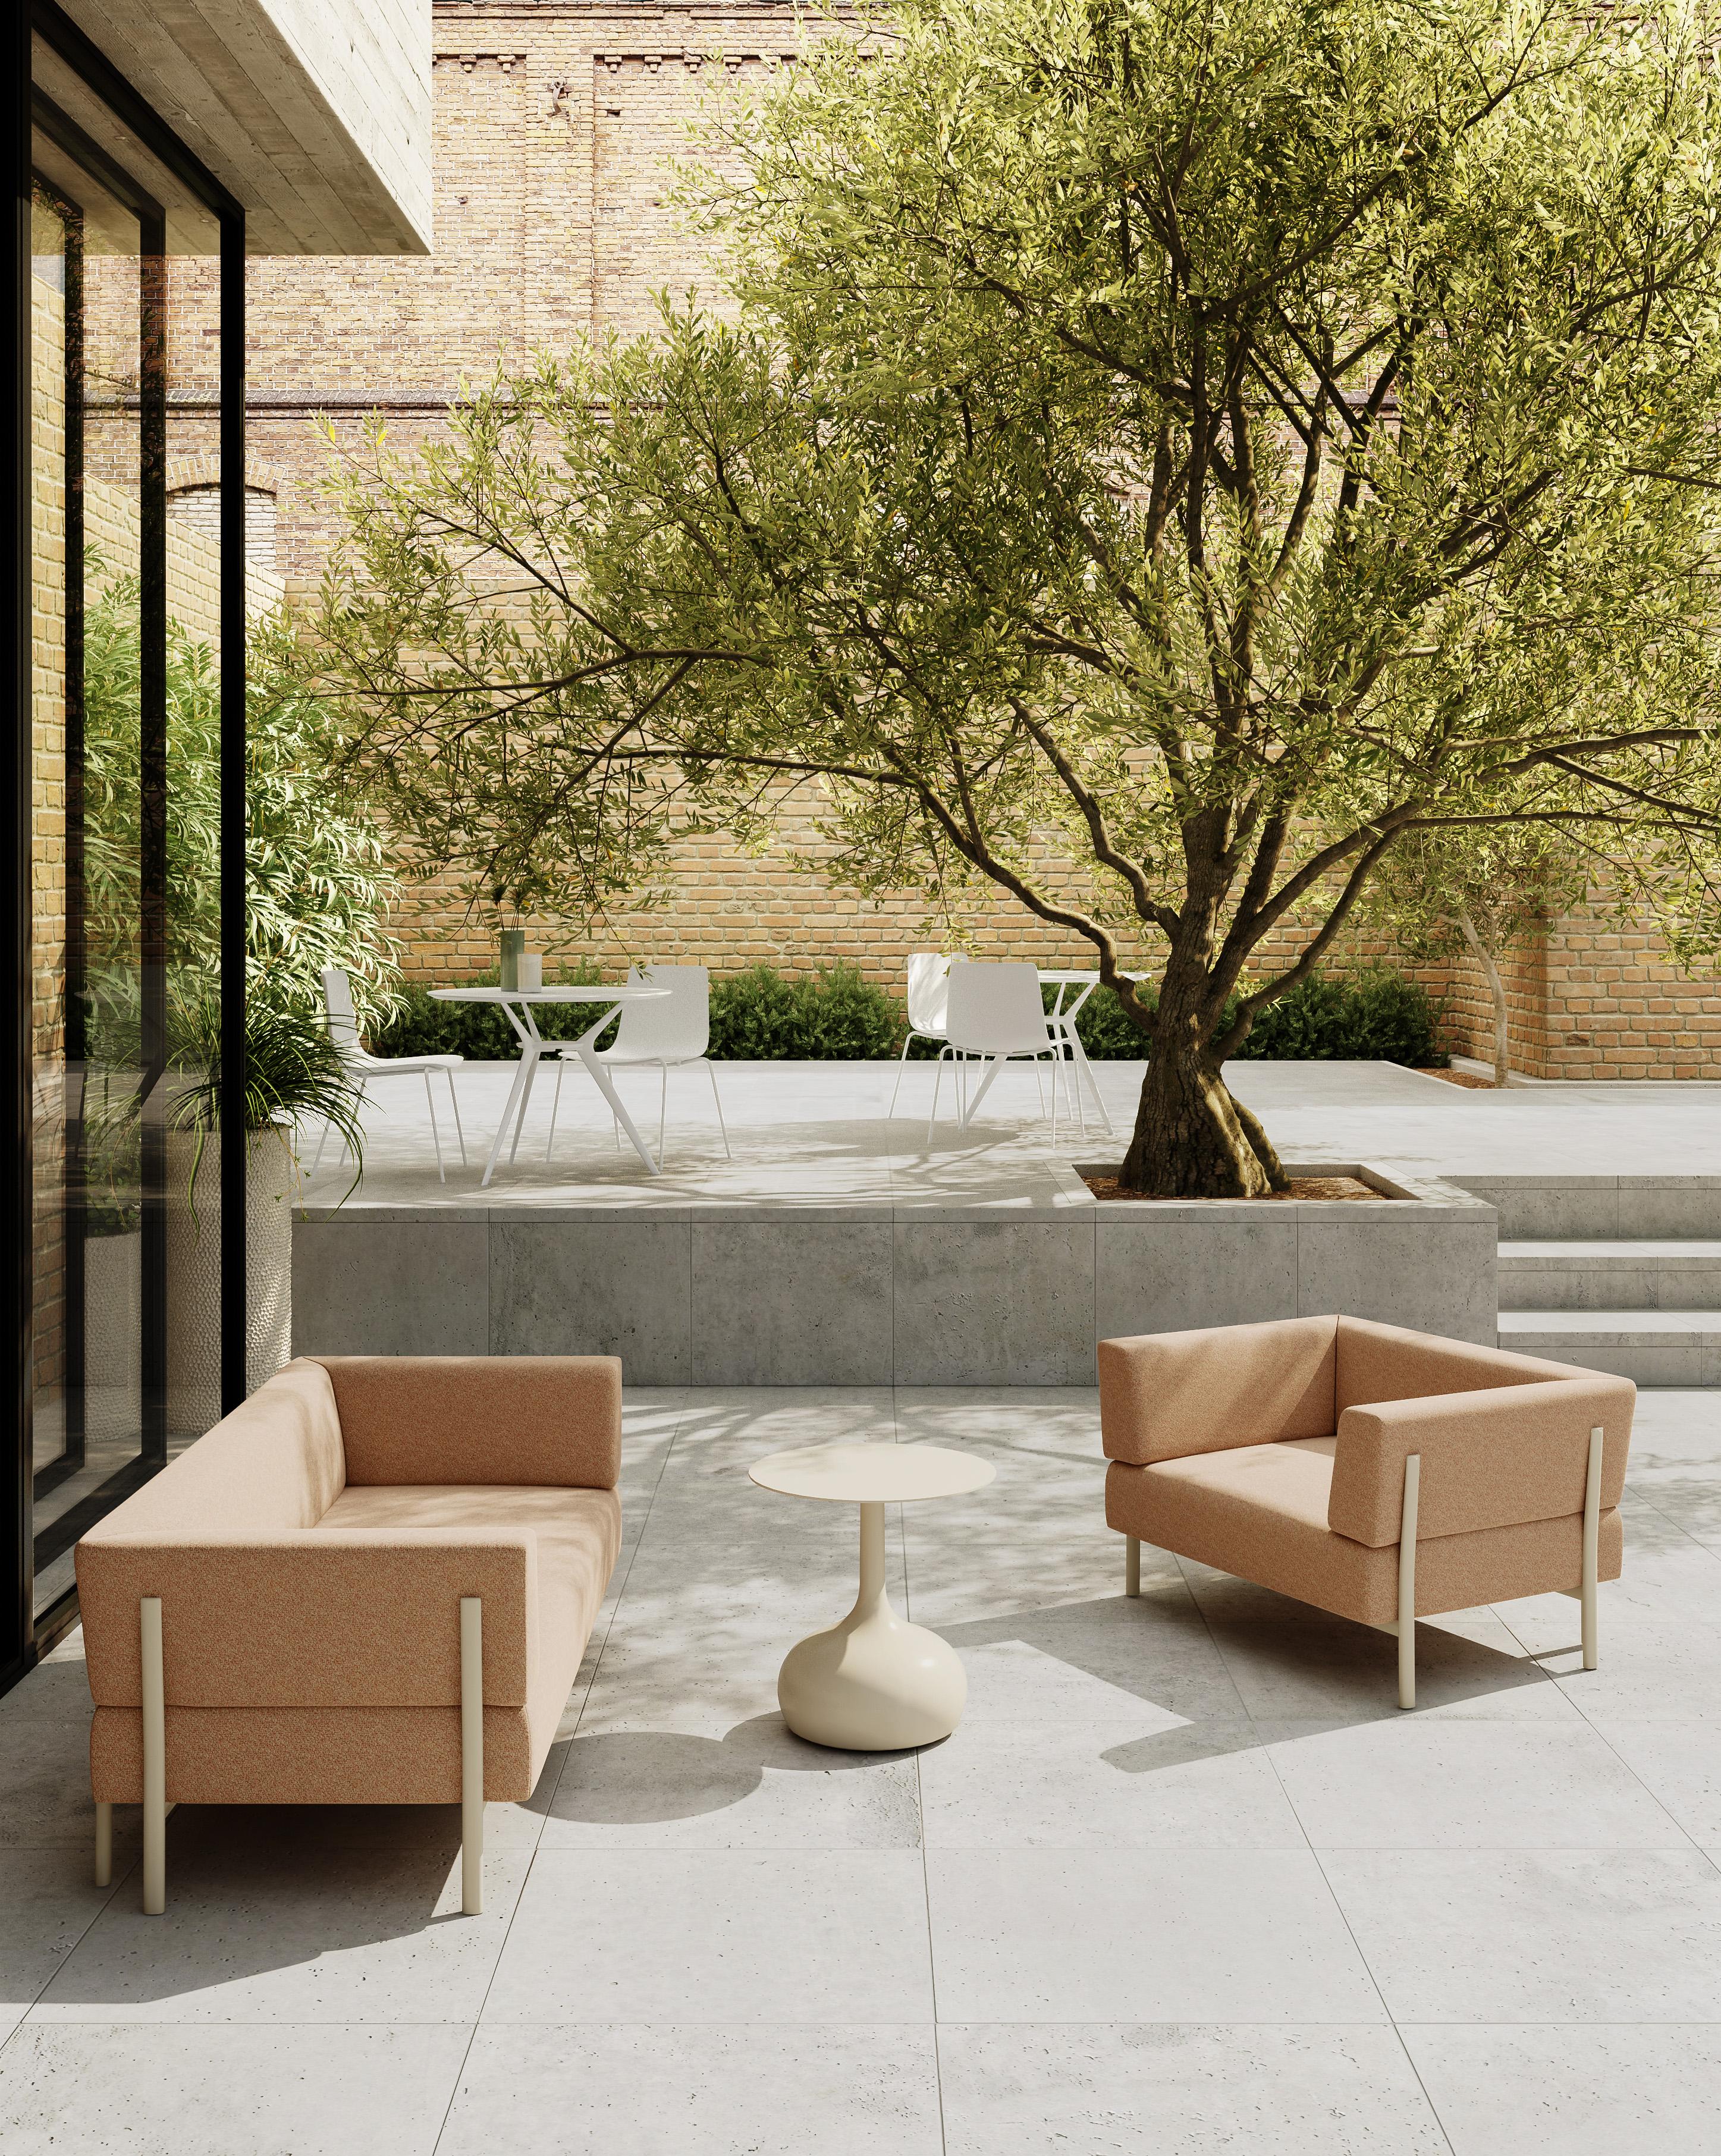 Alias T02_O Ten 2 Seater Outdoor Sofa in Grey and White Lacquered Aluminum Frame by PearsonLloyd

Two-seater sofa for outdoor use with lacquered die-cast aluminium legs and stainless steel frame.Seat, back and armrests with removable cover in